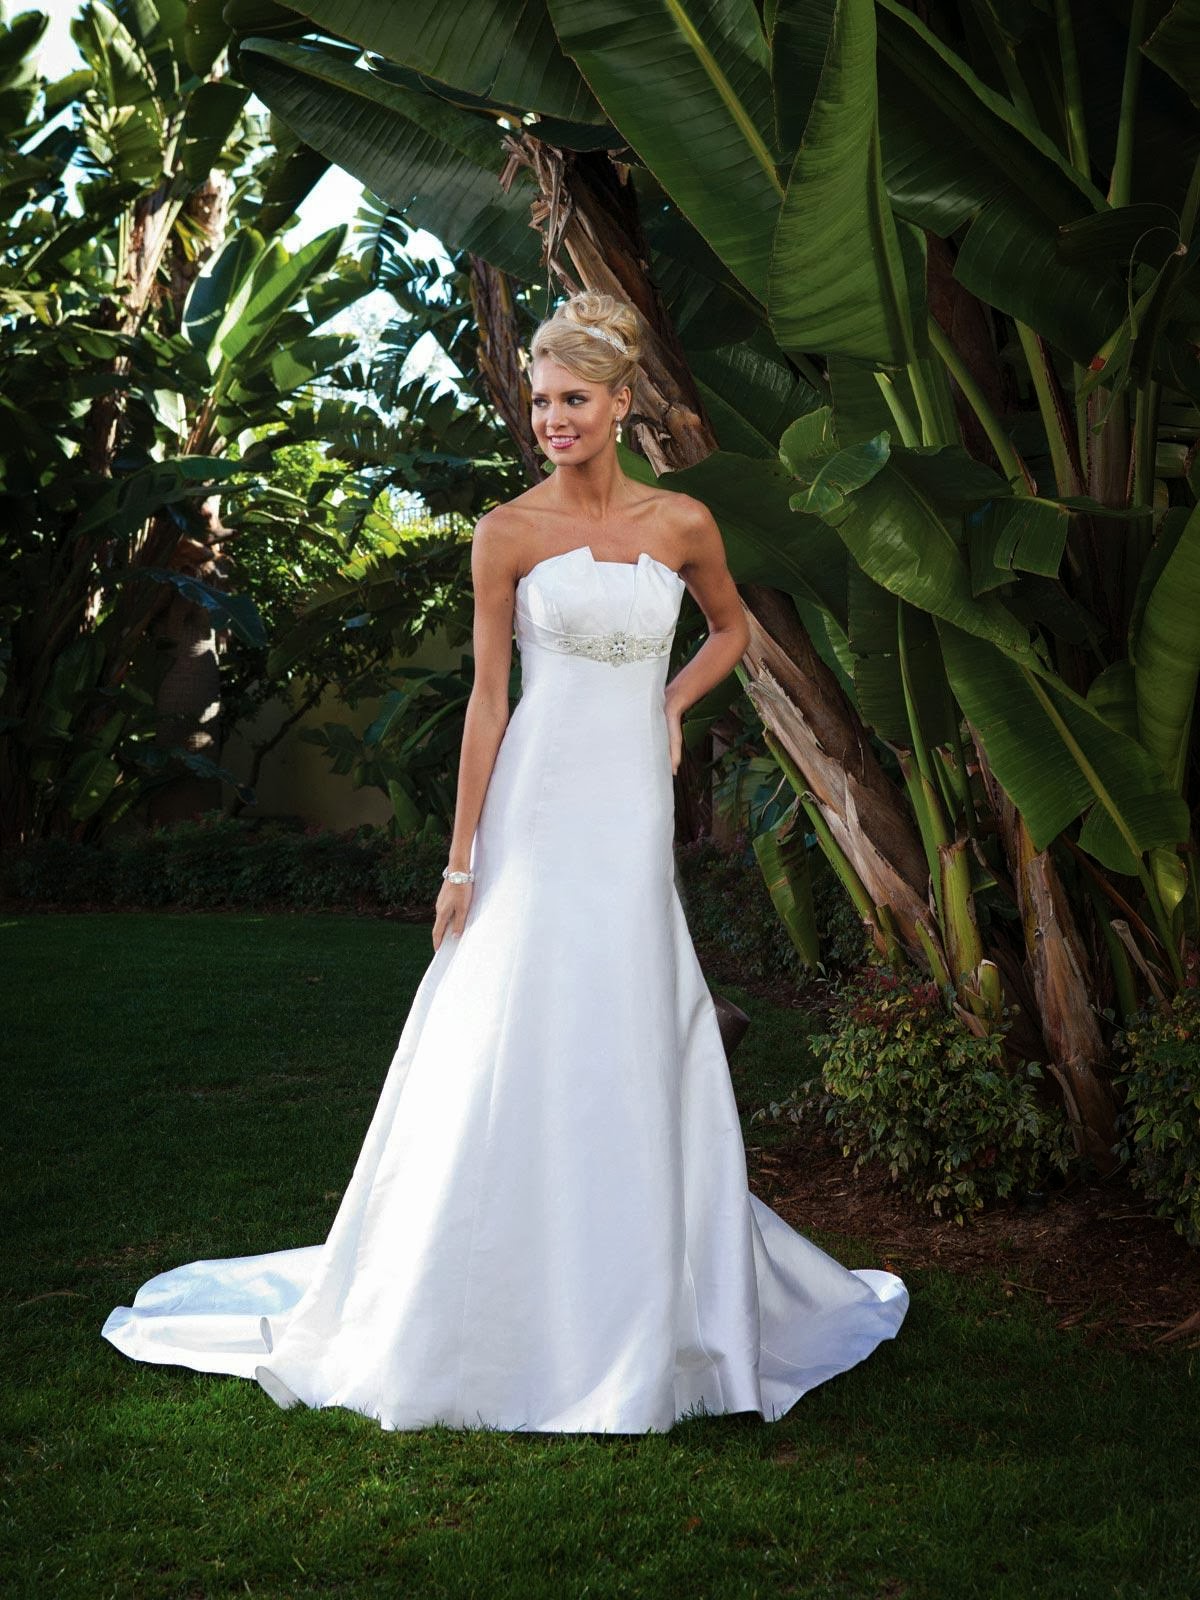 simple wedding dresses 2014  wedding photo studio they d prepare the full figured wedding gown for